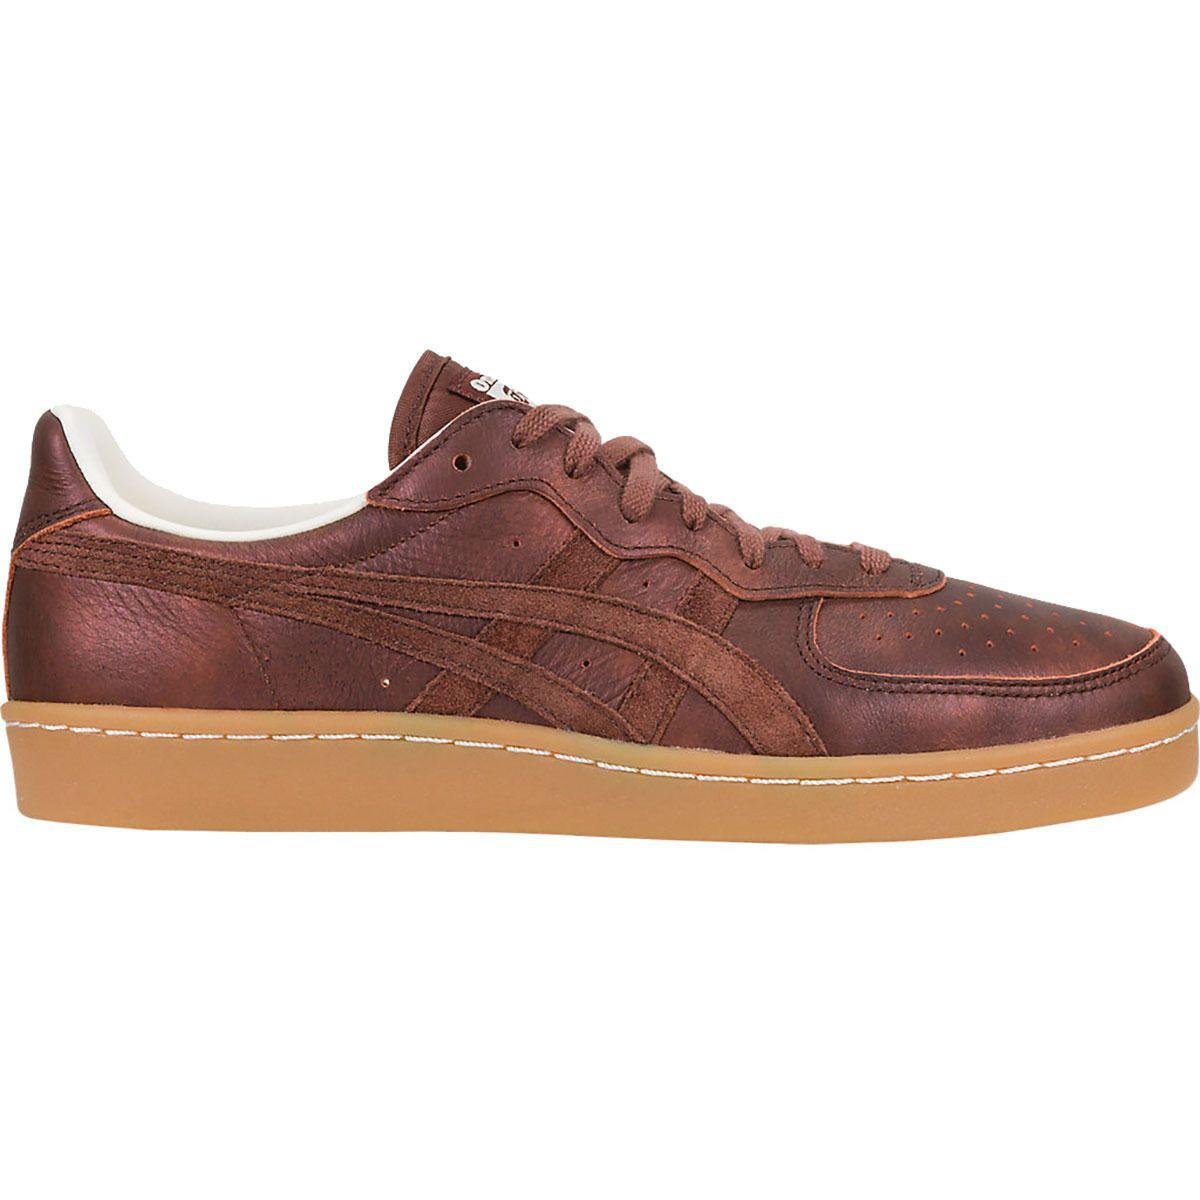 Asics Leather Onitsuka Tiger Gsm Shoe in Coffee/Coffee (Brown) for Men -  Lyst